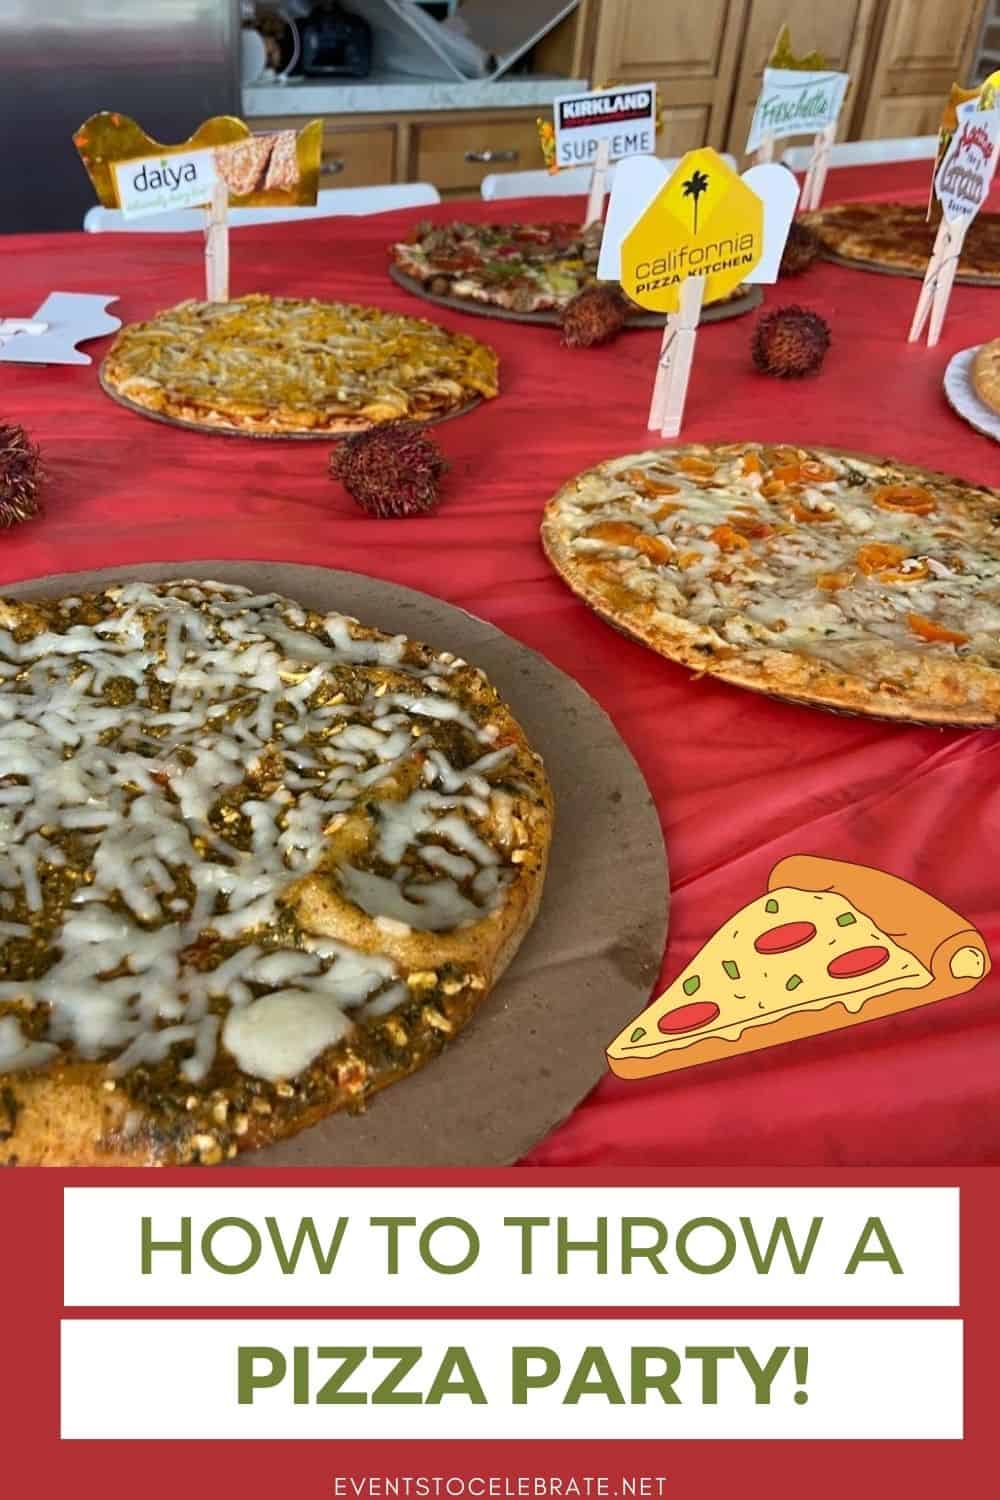 How to throw a pizza party with ideas for sides and decor